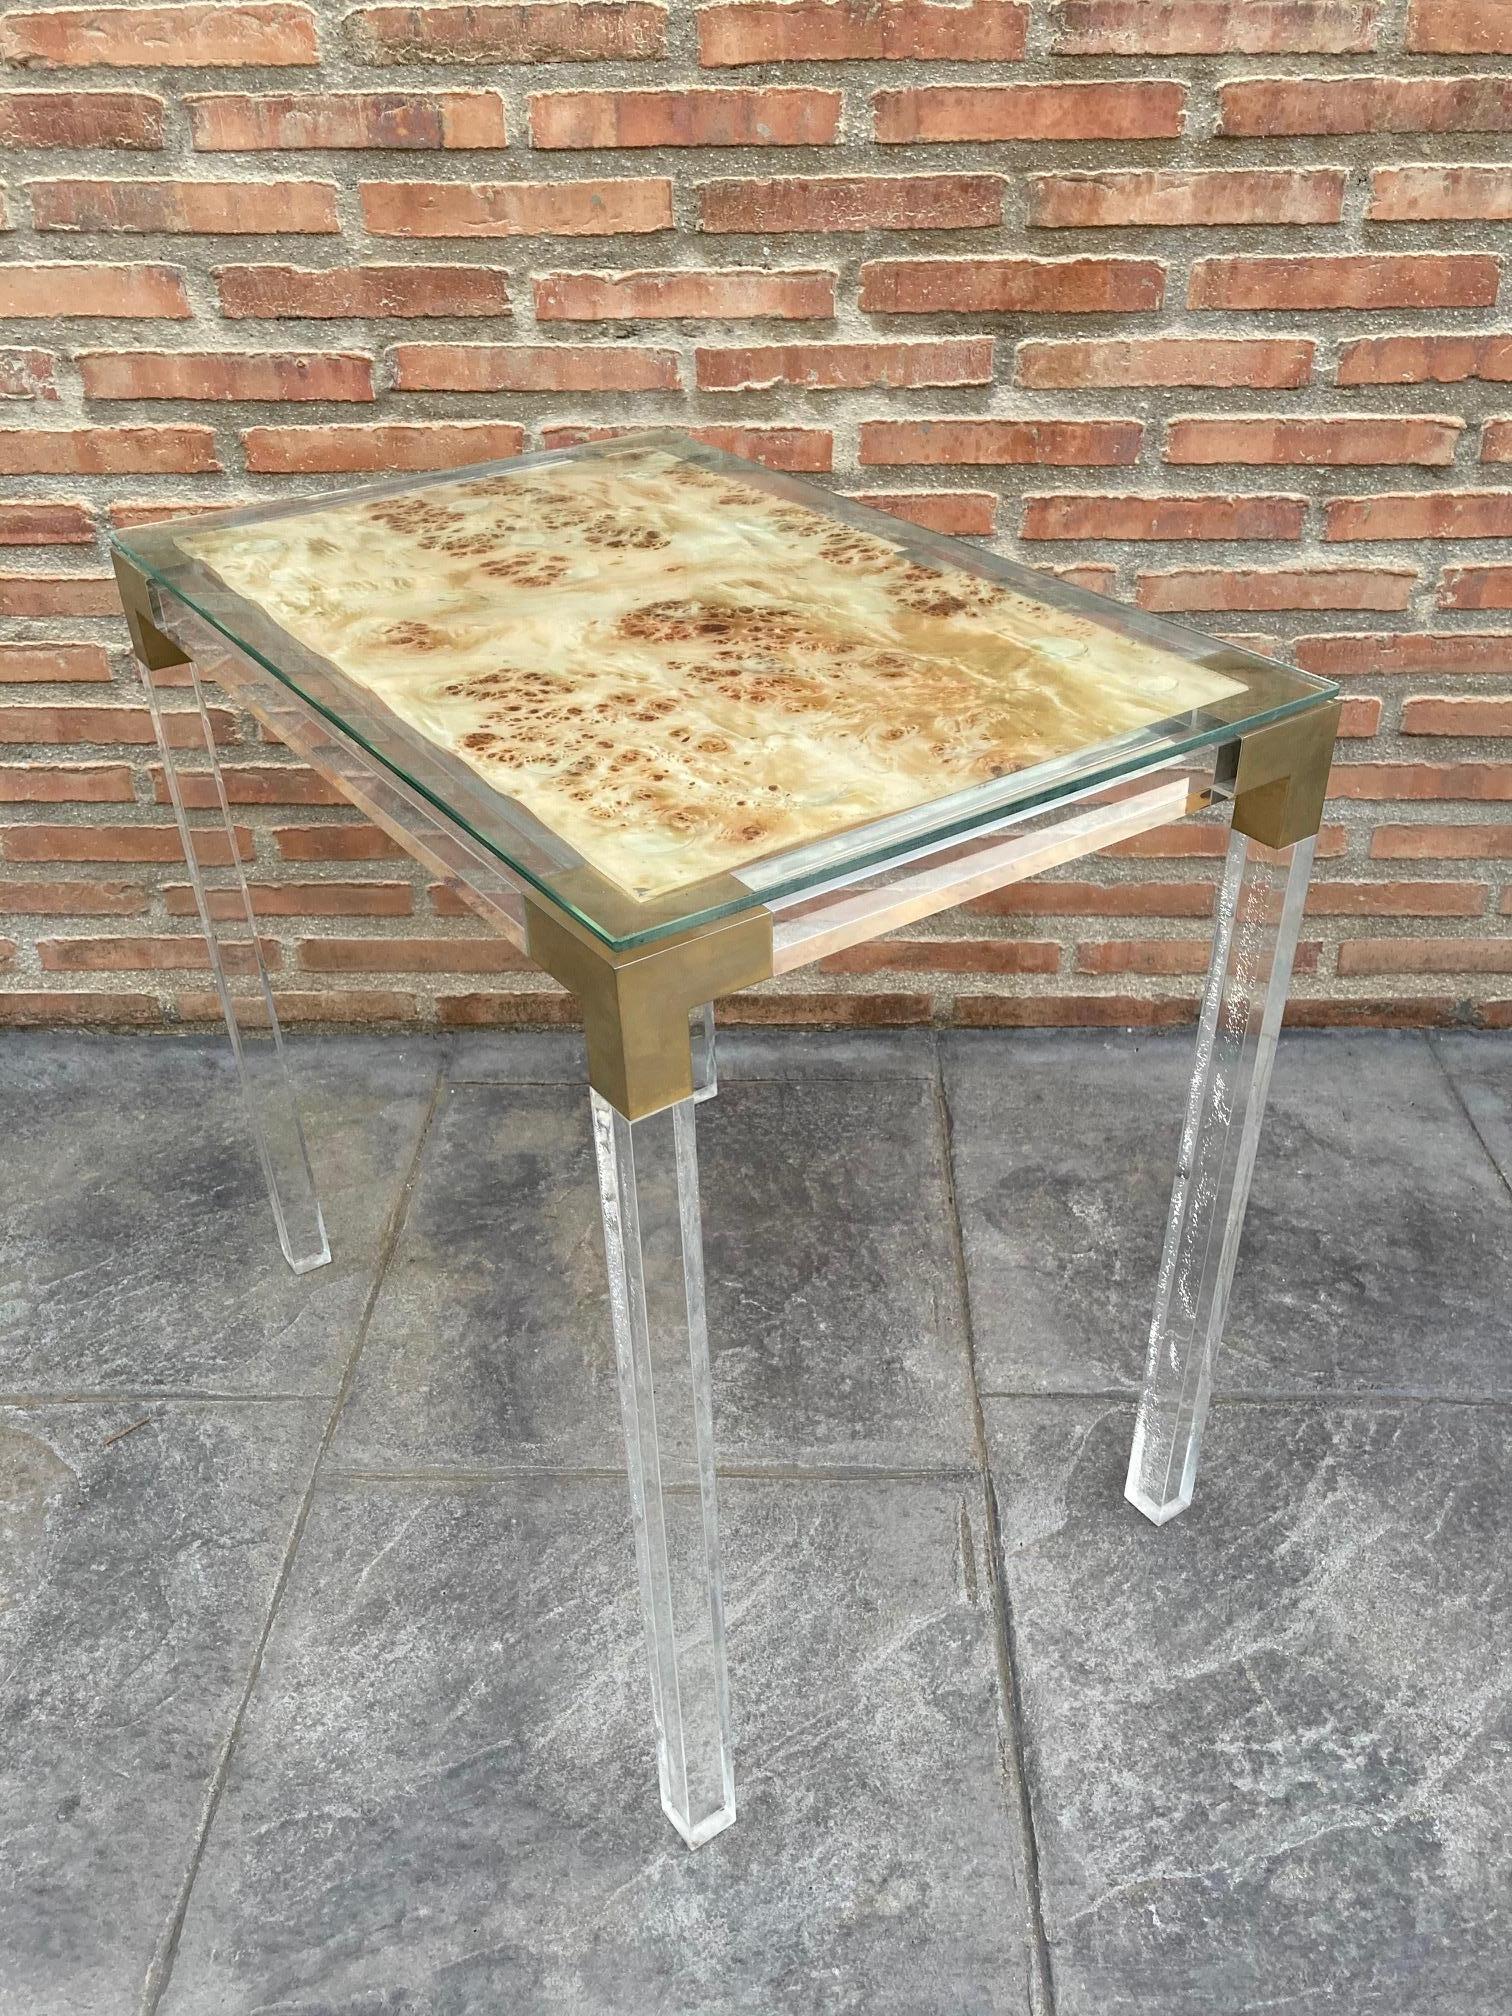 Vintage methacrylate or lucite and brass side table, 70s. This side table is made of Methacrylate or Lucite and Brass with a colored resin sheet on its top.